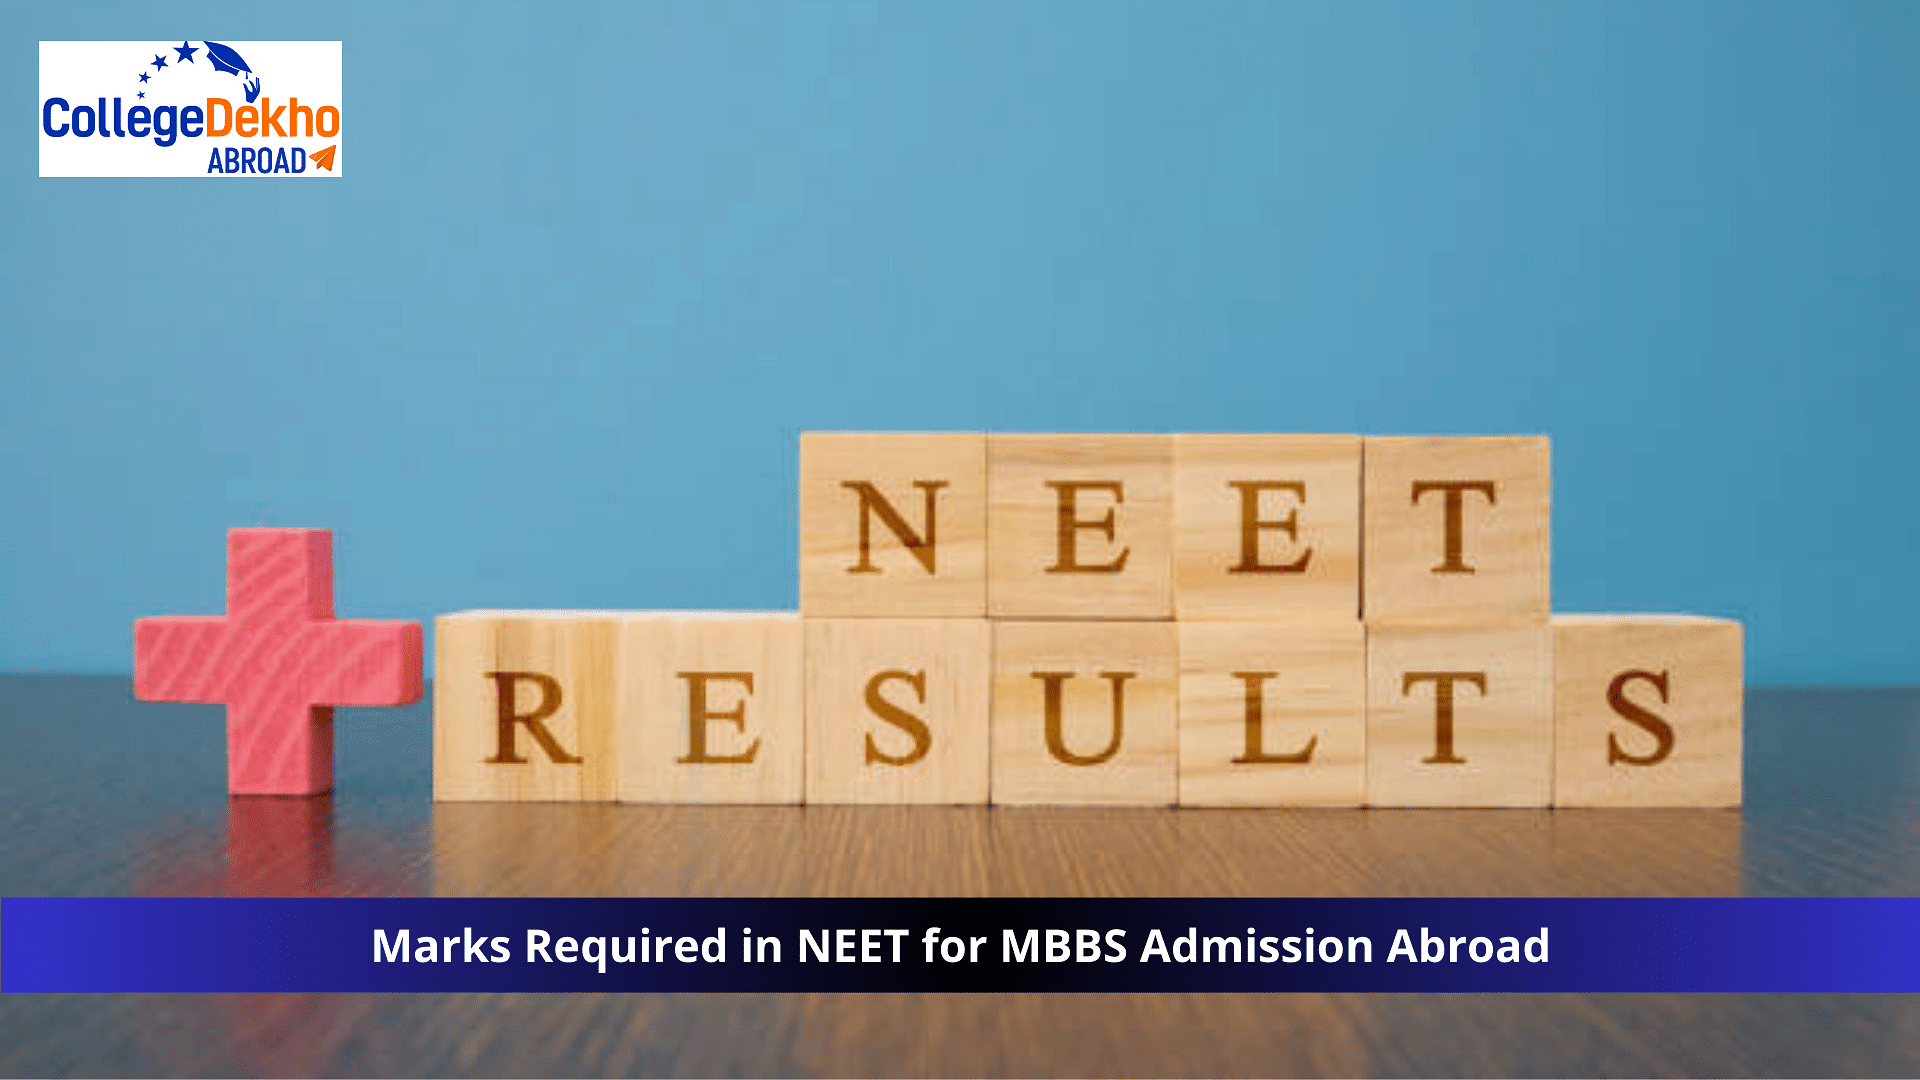 Marks Required in NEET for MBBS Admission Abroad